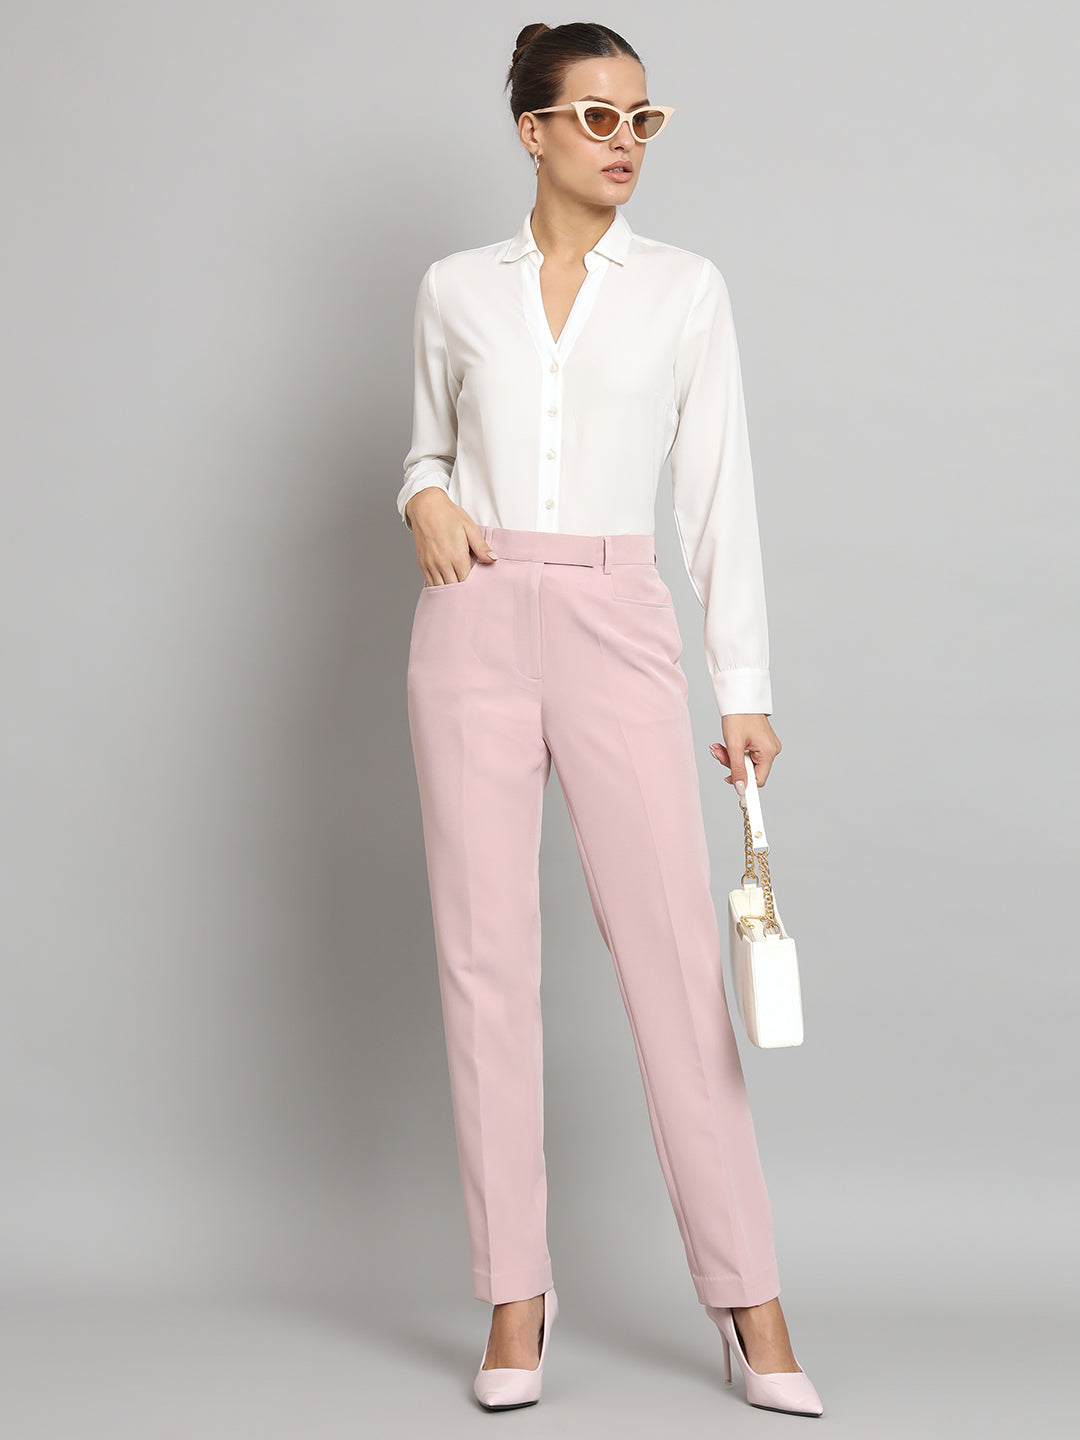 Allsaints Aleida Tri Trousers In Pale Orchid Pi | ModeSens